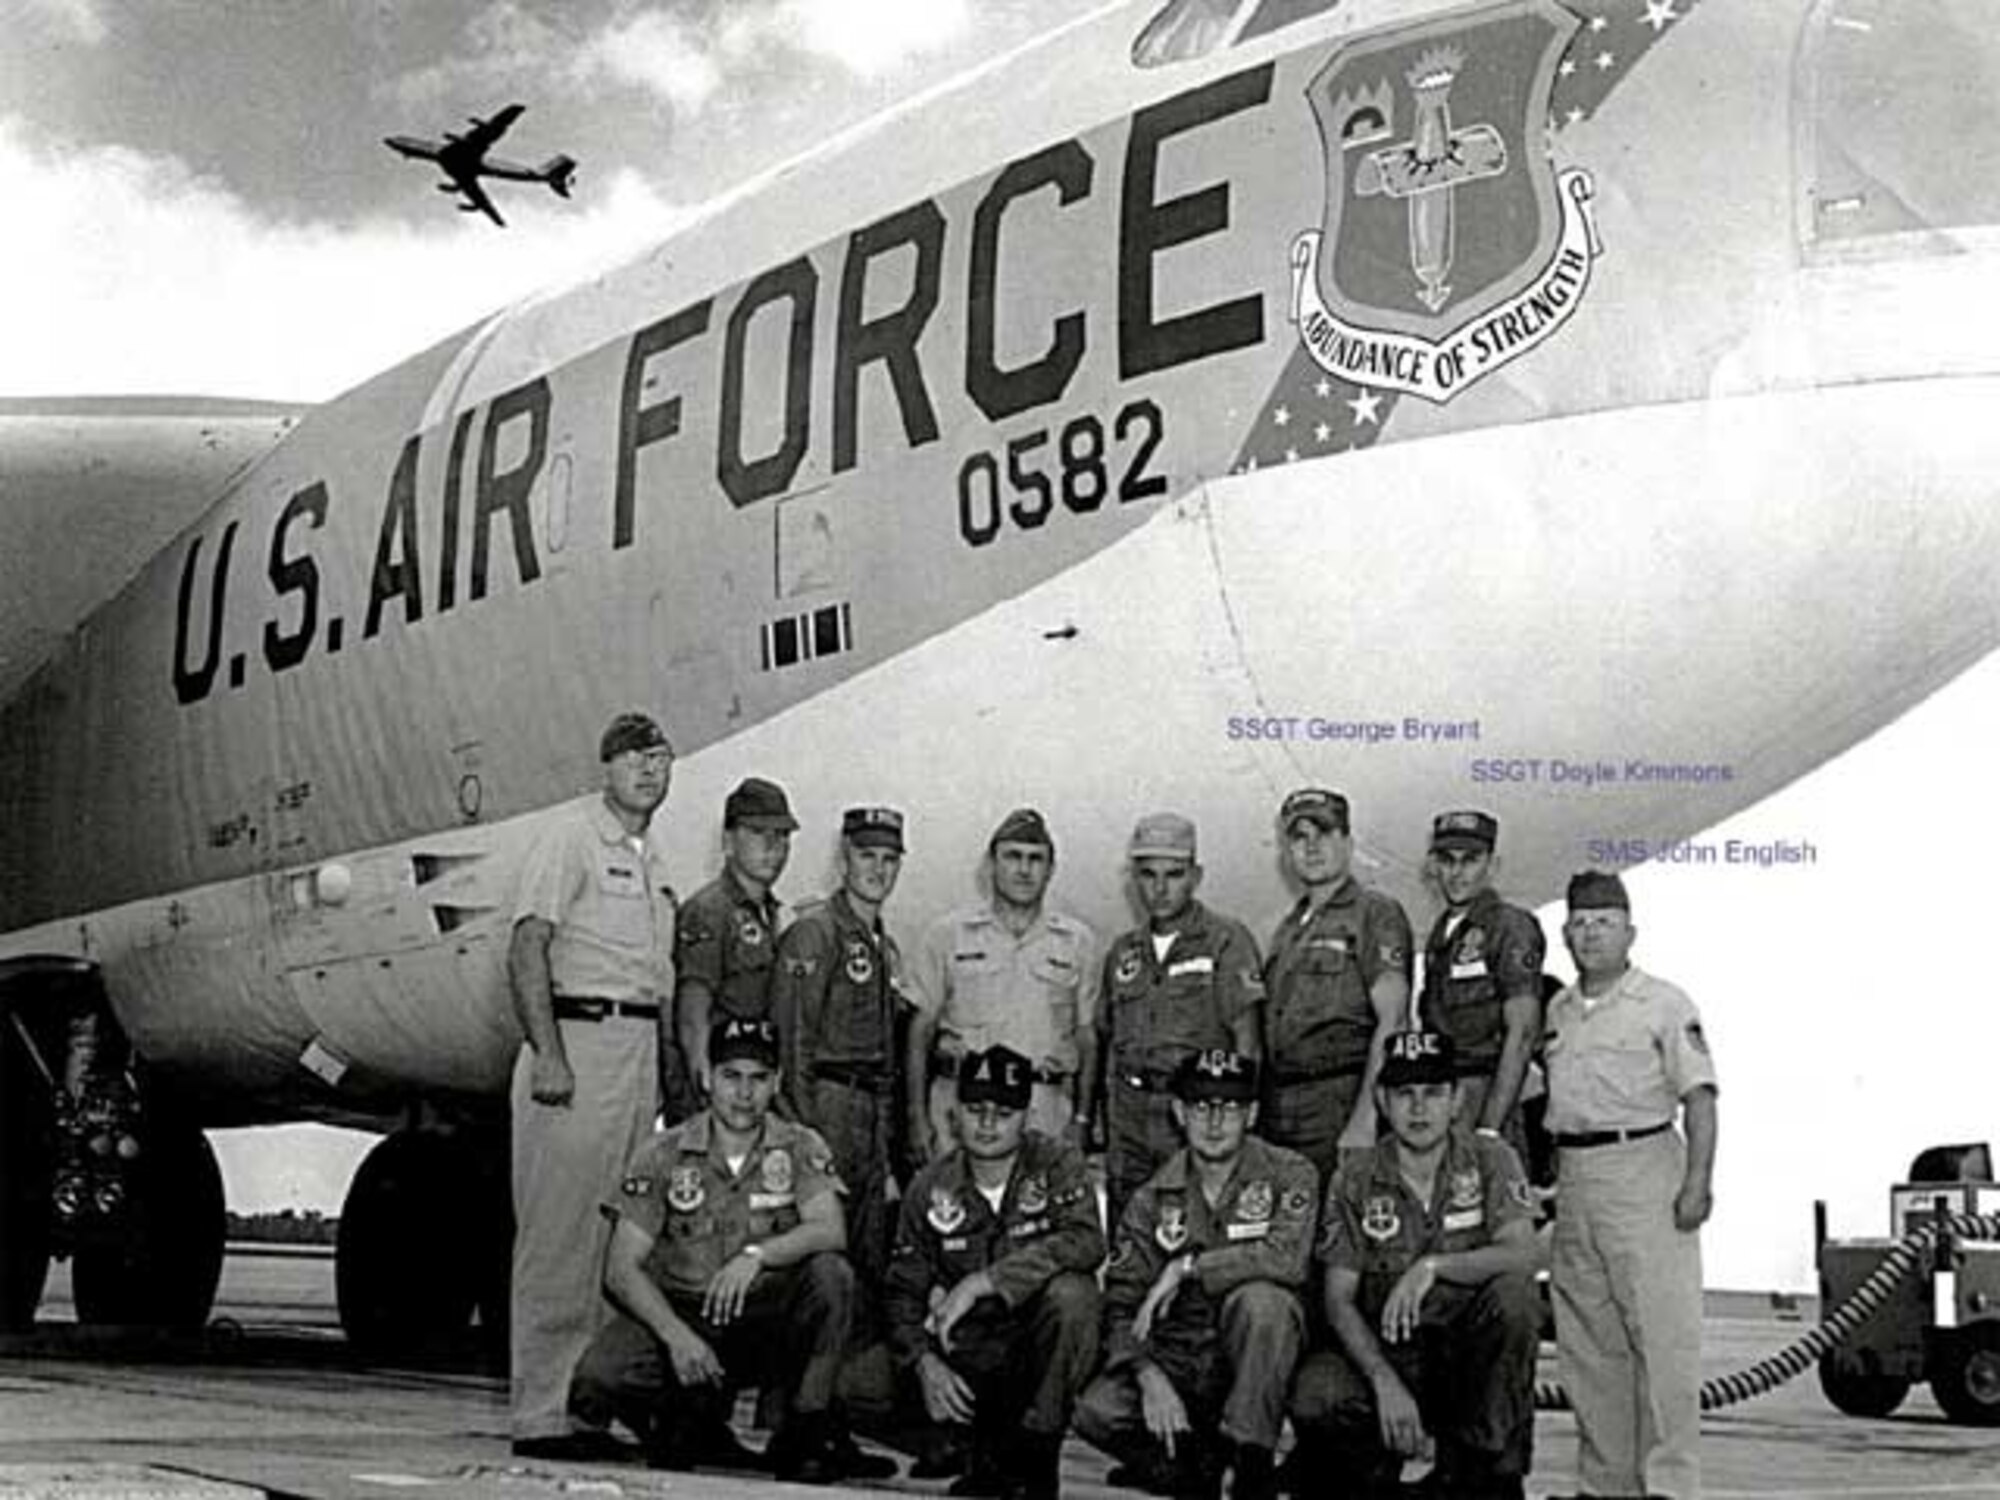 FAIRCHILD AIR FORCE BASE, Wash - The 306th Bomb Wing brought their B-52 Stratofortress crews to the 14th Bombing and Navigation Competition held at Fairchild AFB, Wash., in 1965. This competition had a modified format with one crew and aircraft from each of the 44 participating wings (two B-58s, five B-47s and 37 B-52s). This is the last year the B-47s participated. (Courtesy photo)